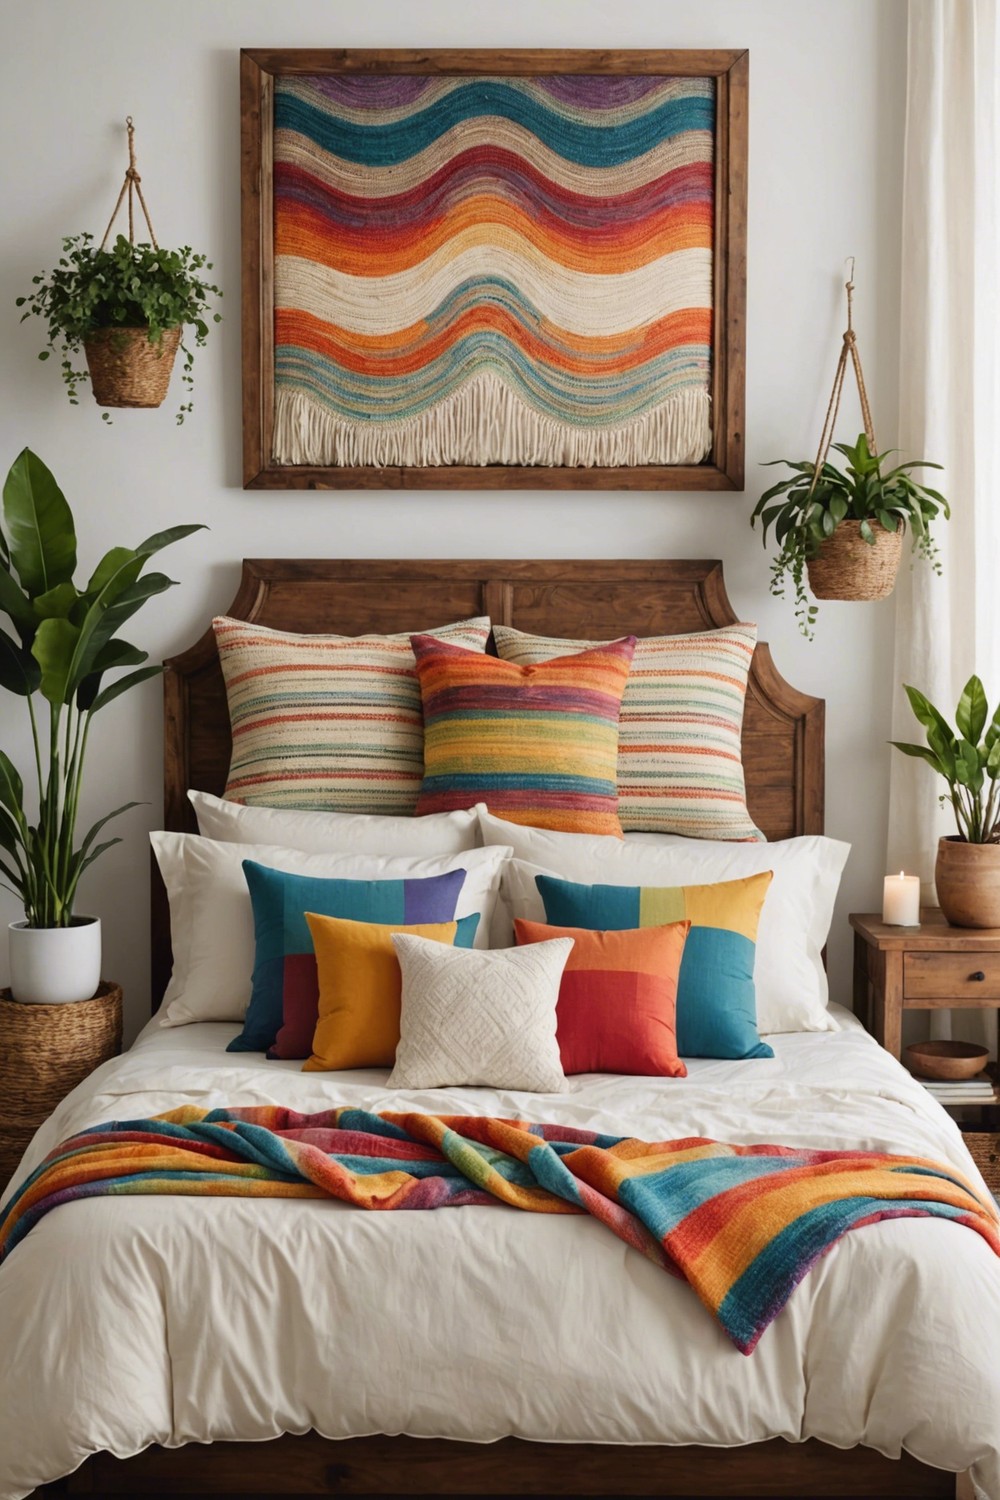 Unconventional Headboards with Rainbow Fabric